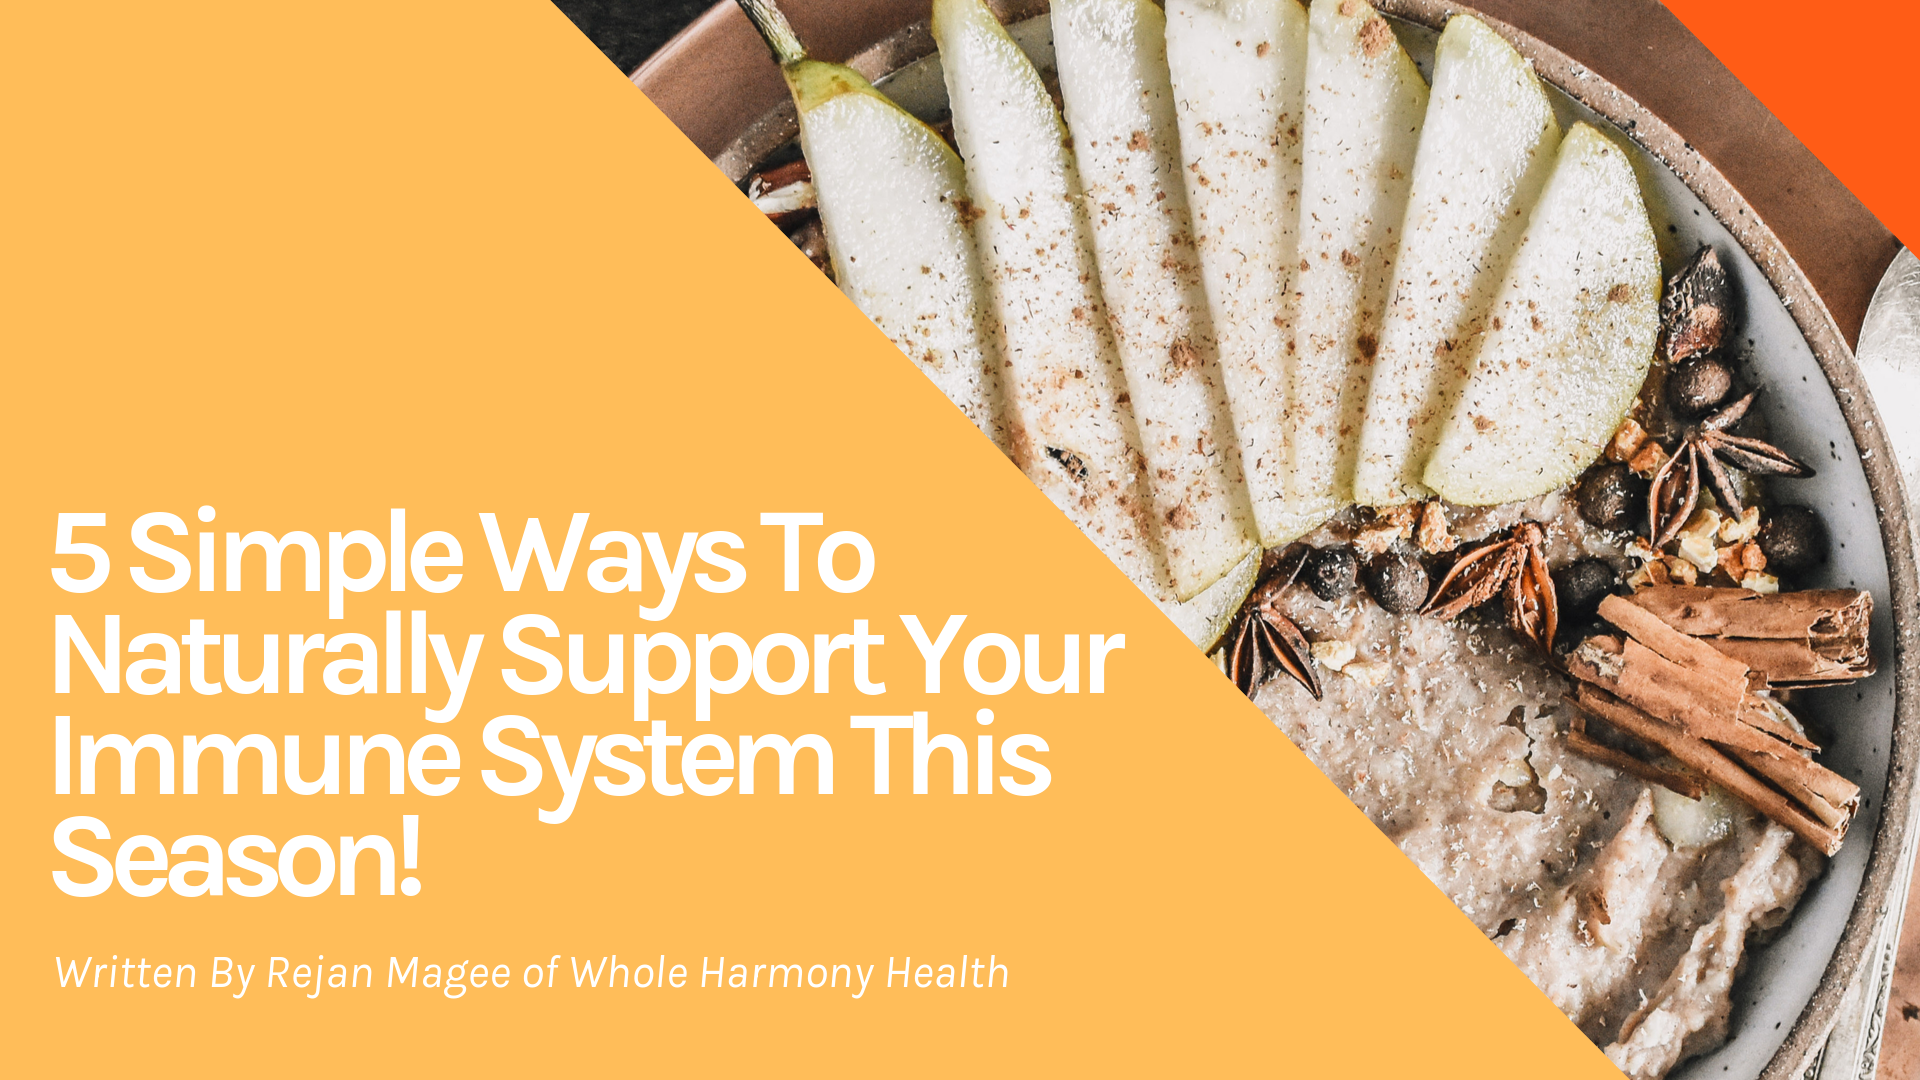 5 Simple Ways To Naturally Support Your Immune System This Season